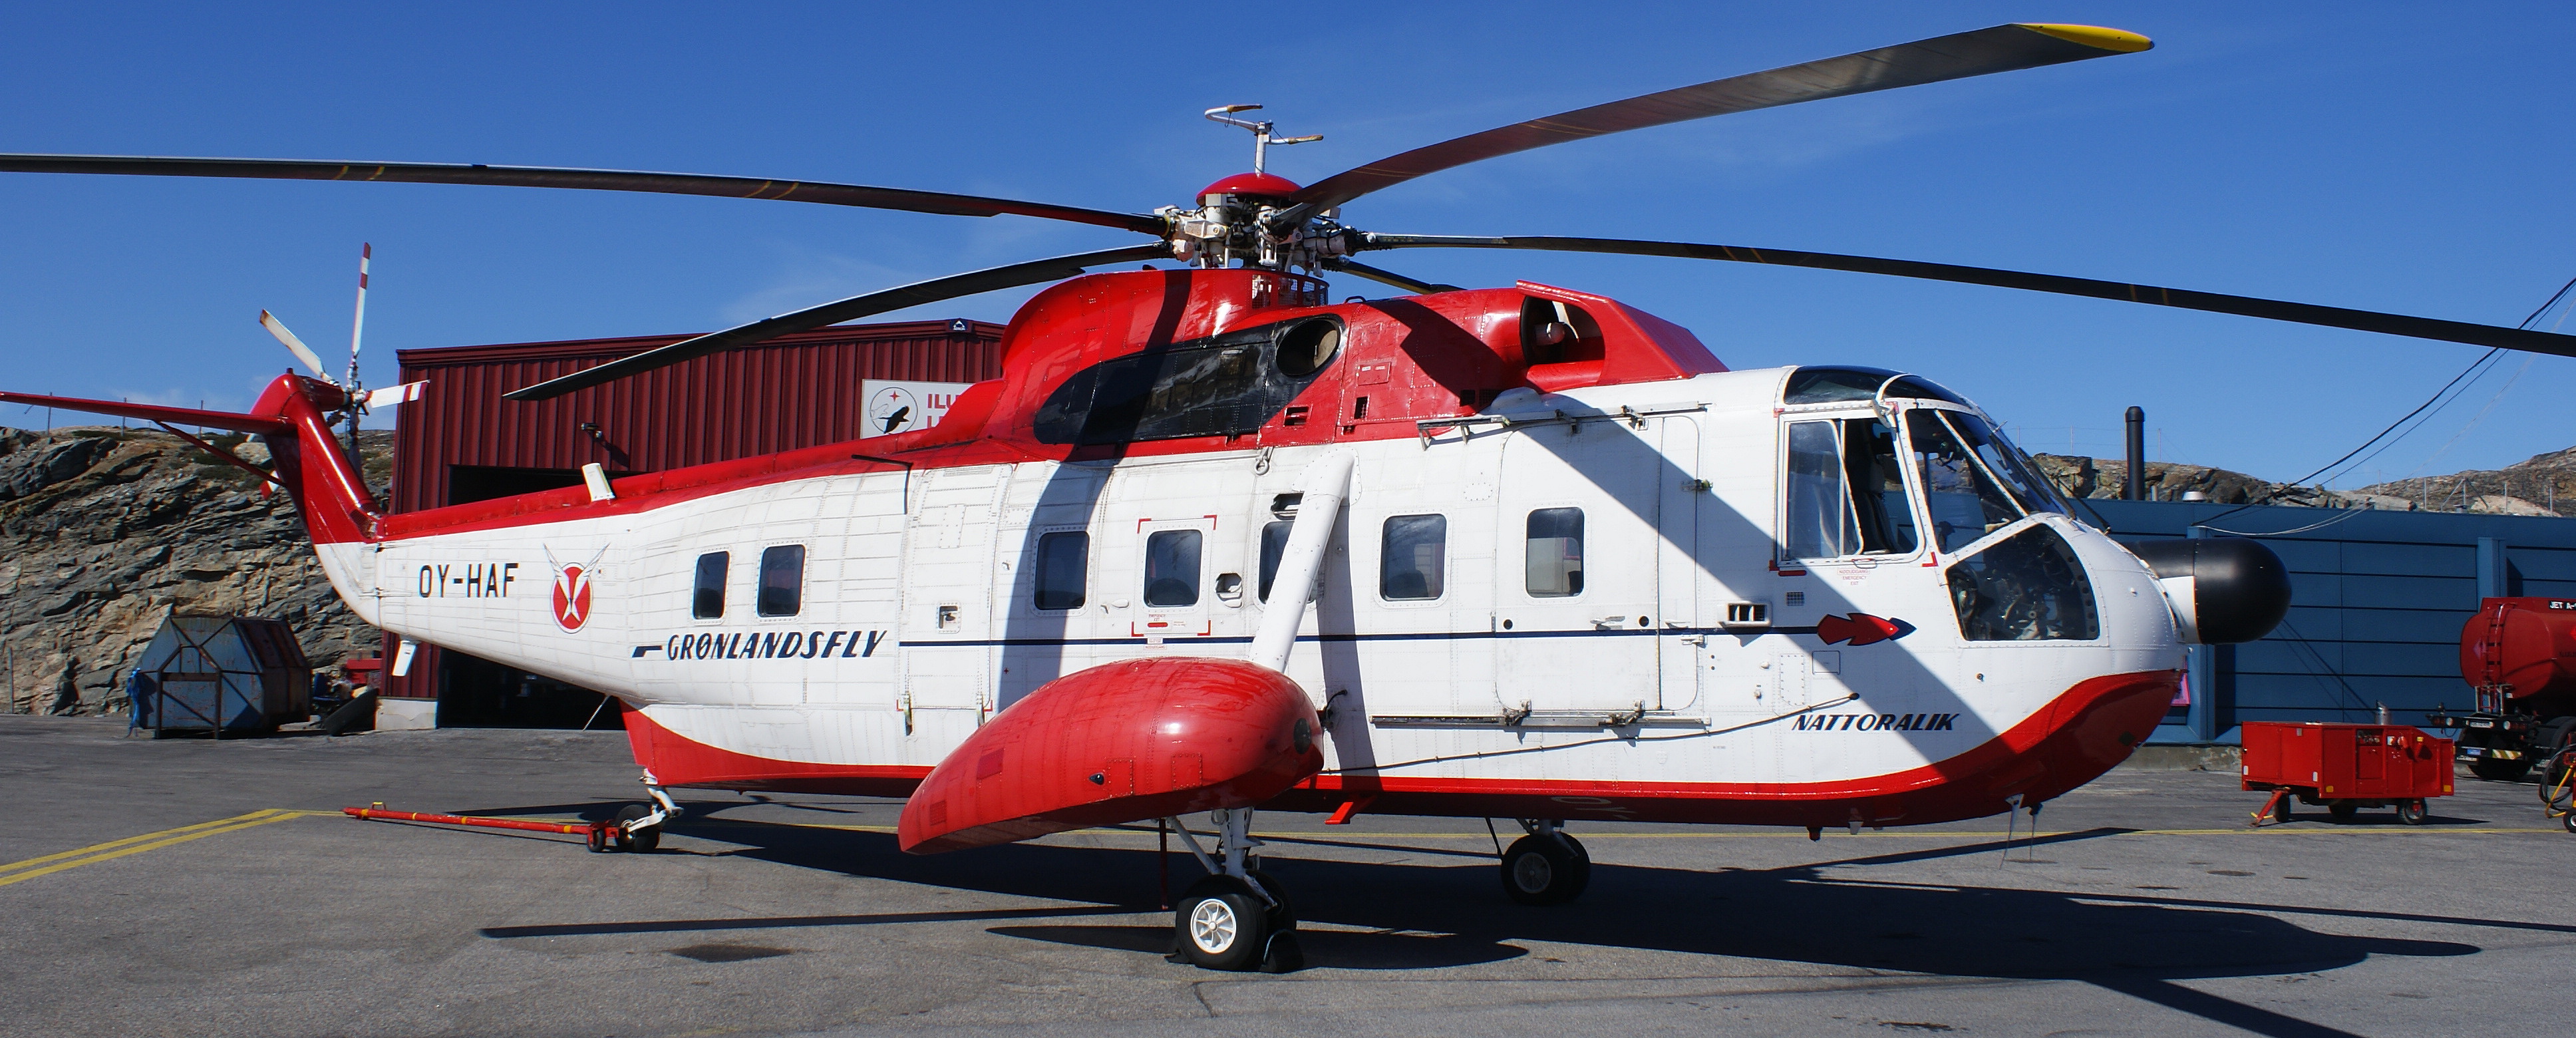 File Air Greenland Sikorsky S61n Ilulissat Airport Jpg Wikipedia